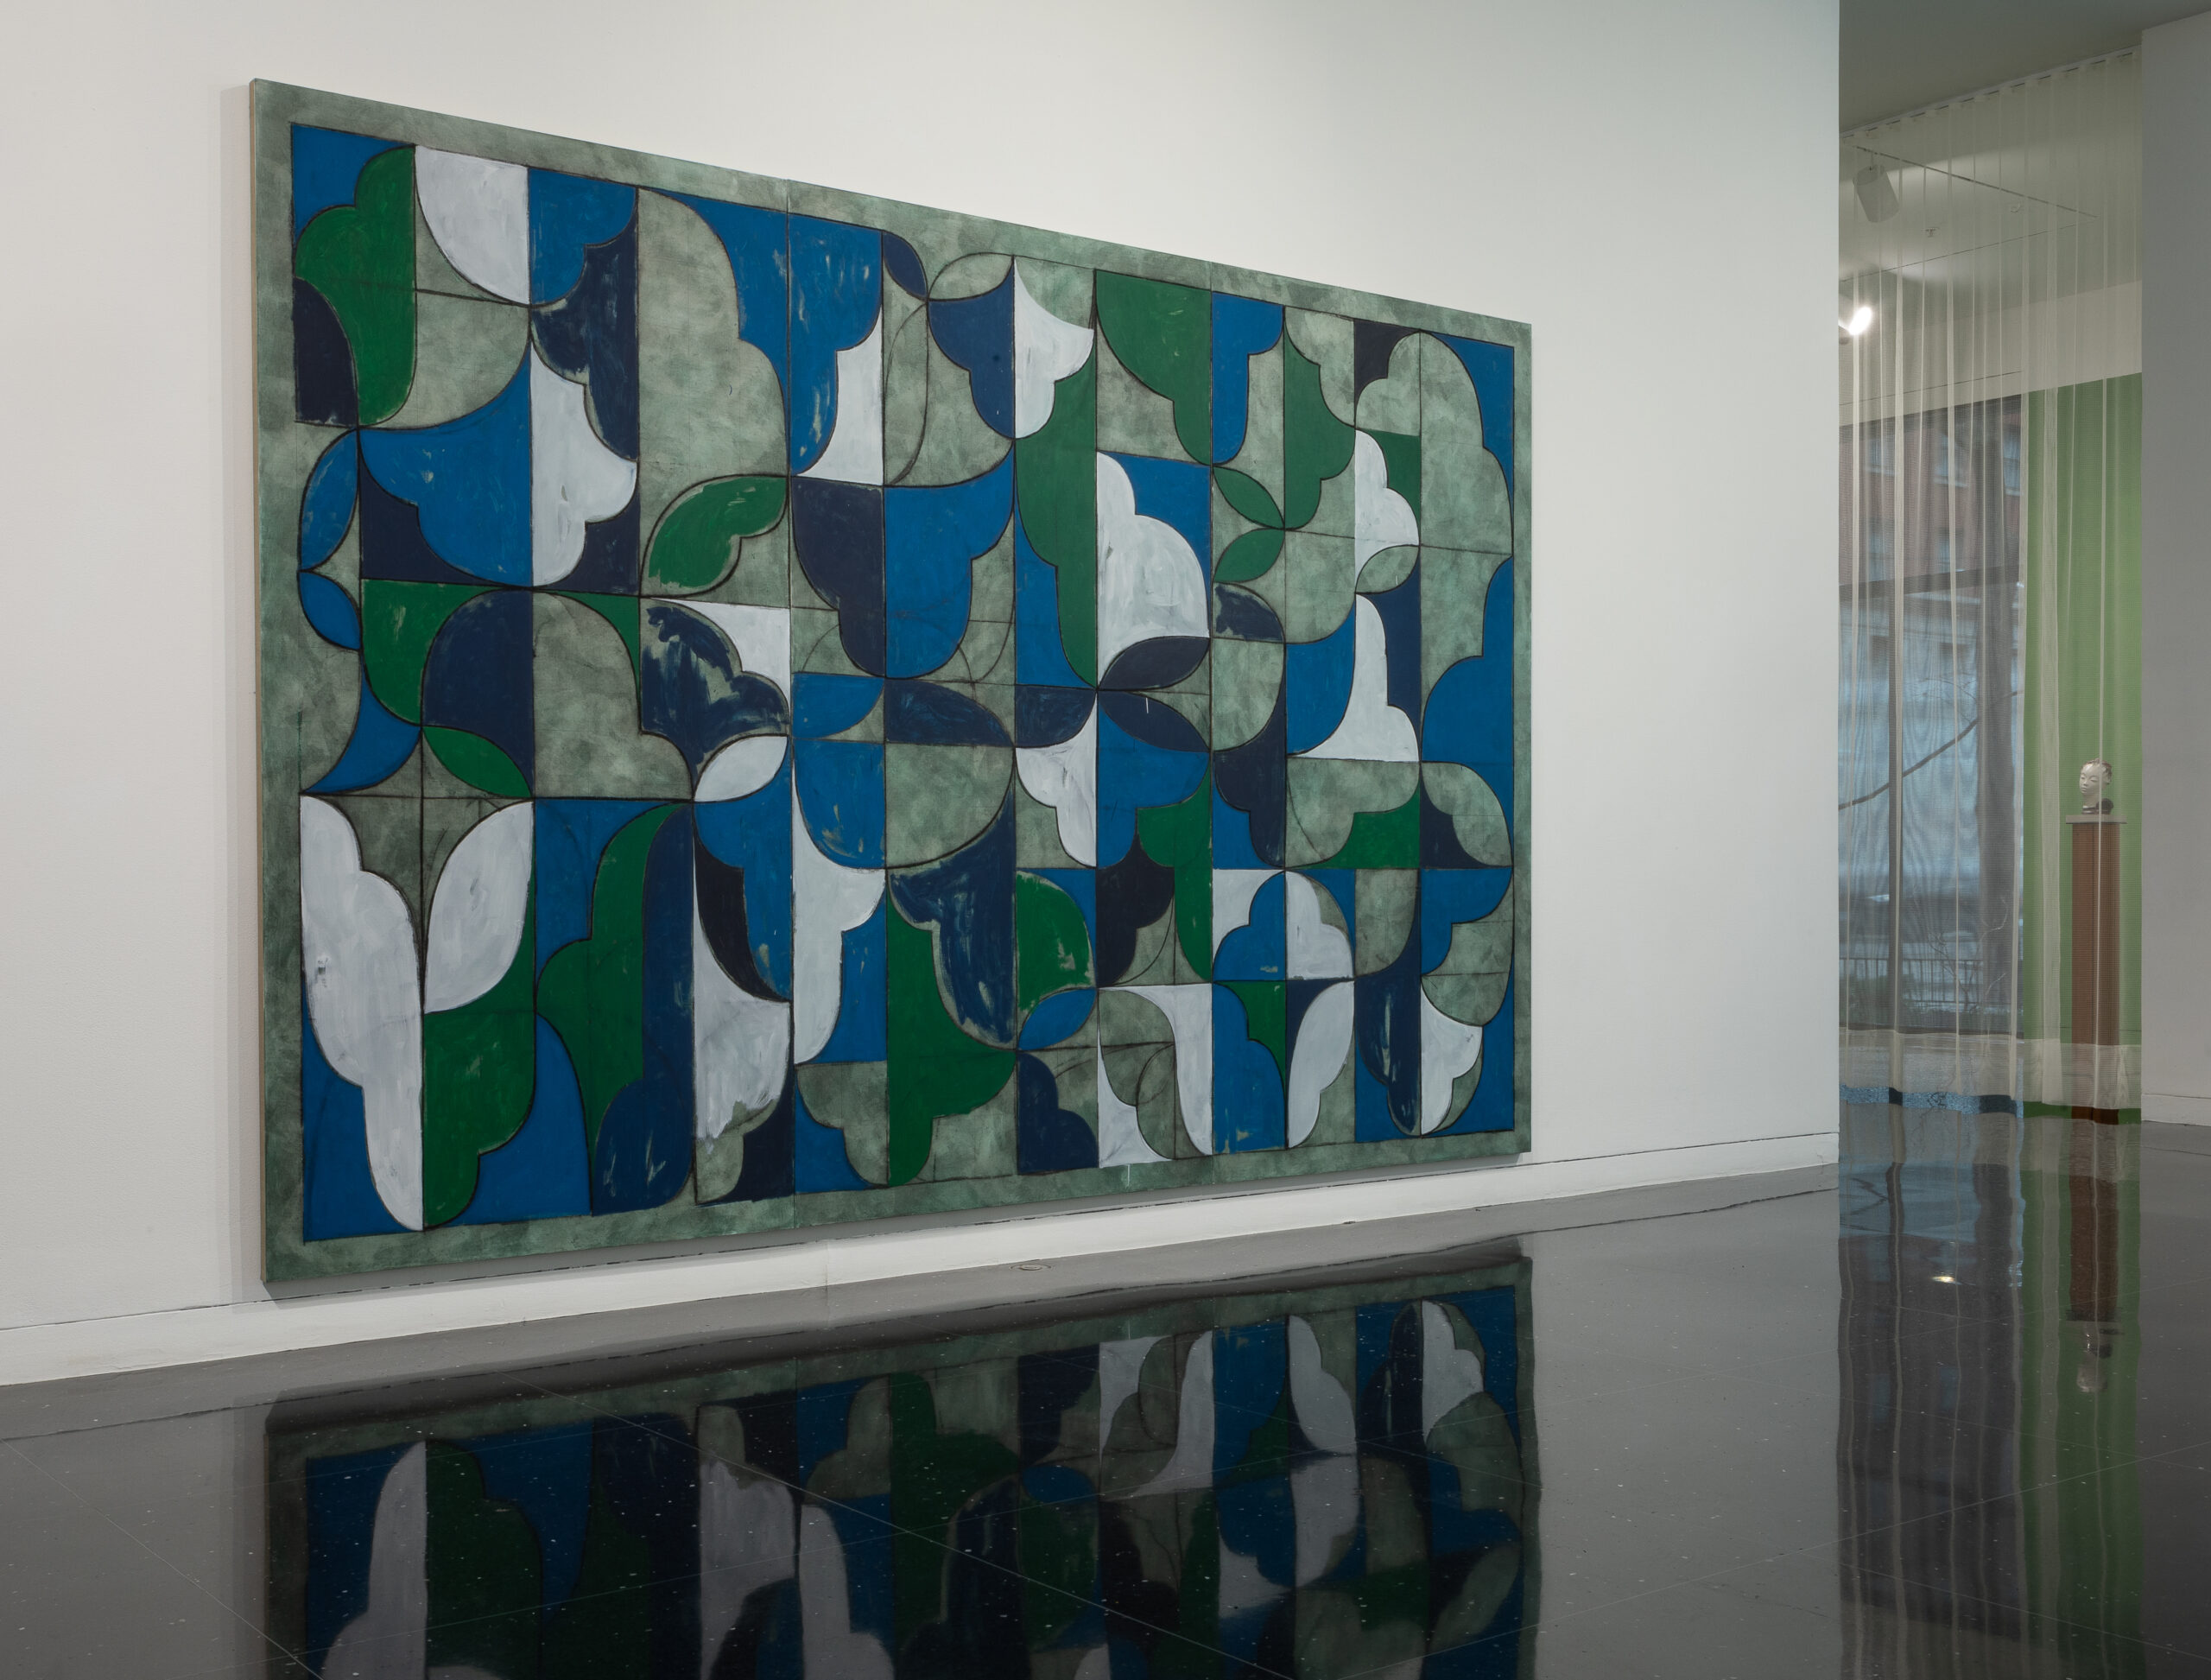 A large, nearly wall-sized abstract painting with blue, white, gray, and green interlocking curvilinear formsdisplayed on a white gallery wall.